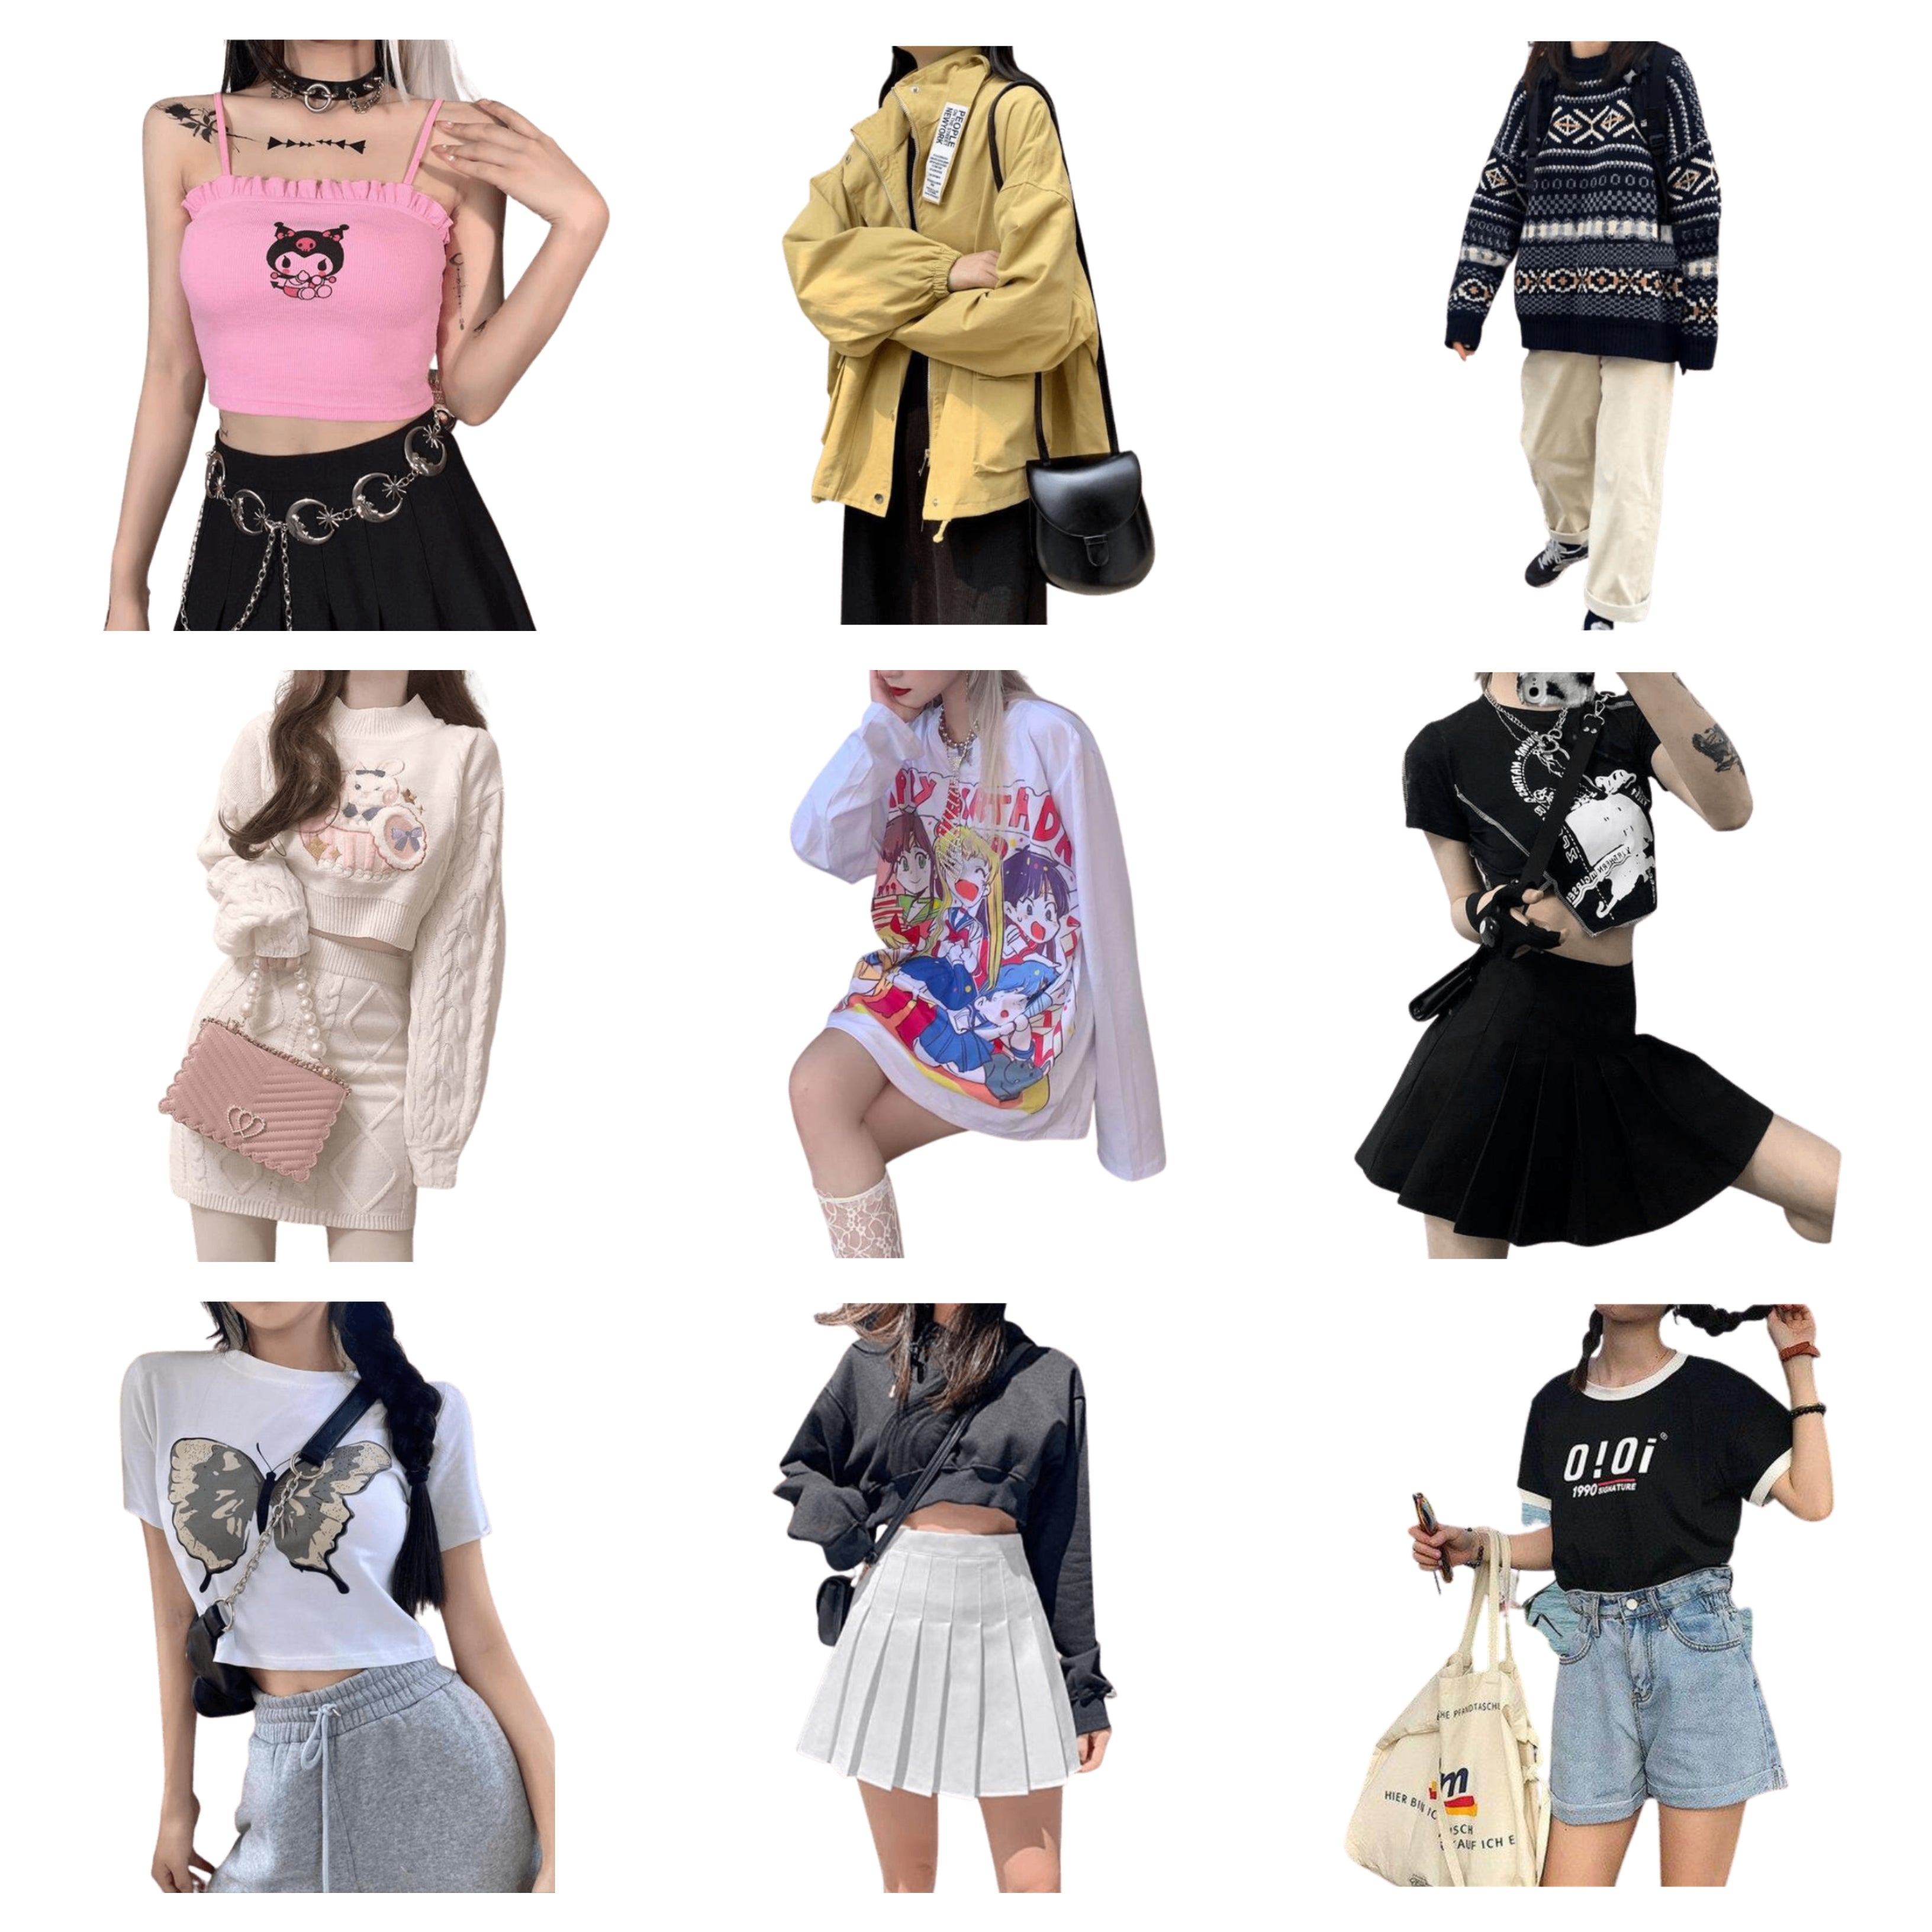 25 Different Clothing Aesthetics Types That You Should Know About - Shoptery